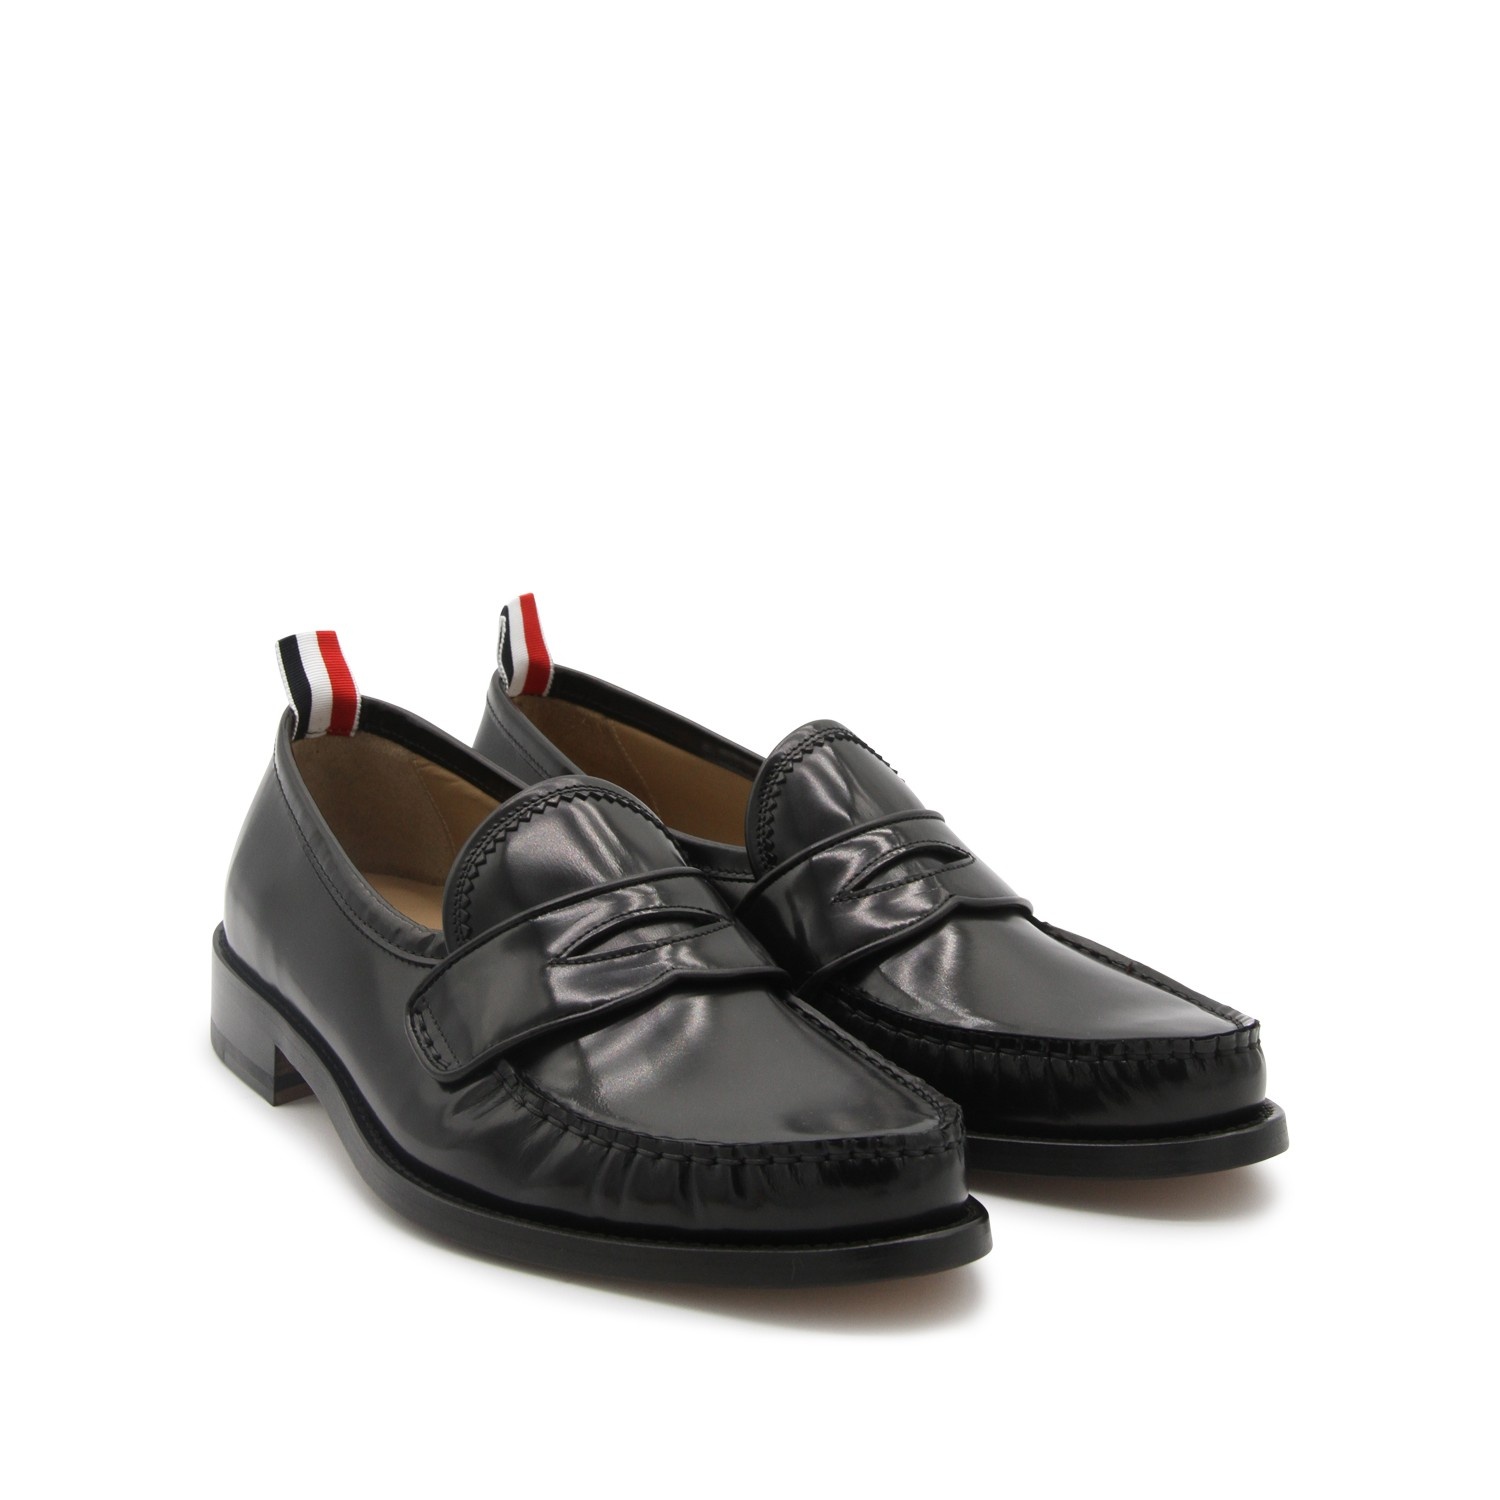 BLACK LEATHER LOAFERS - 2